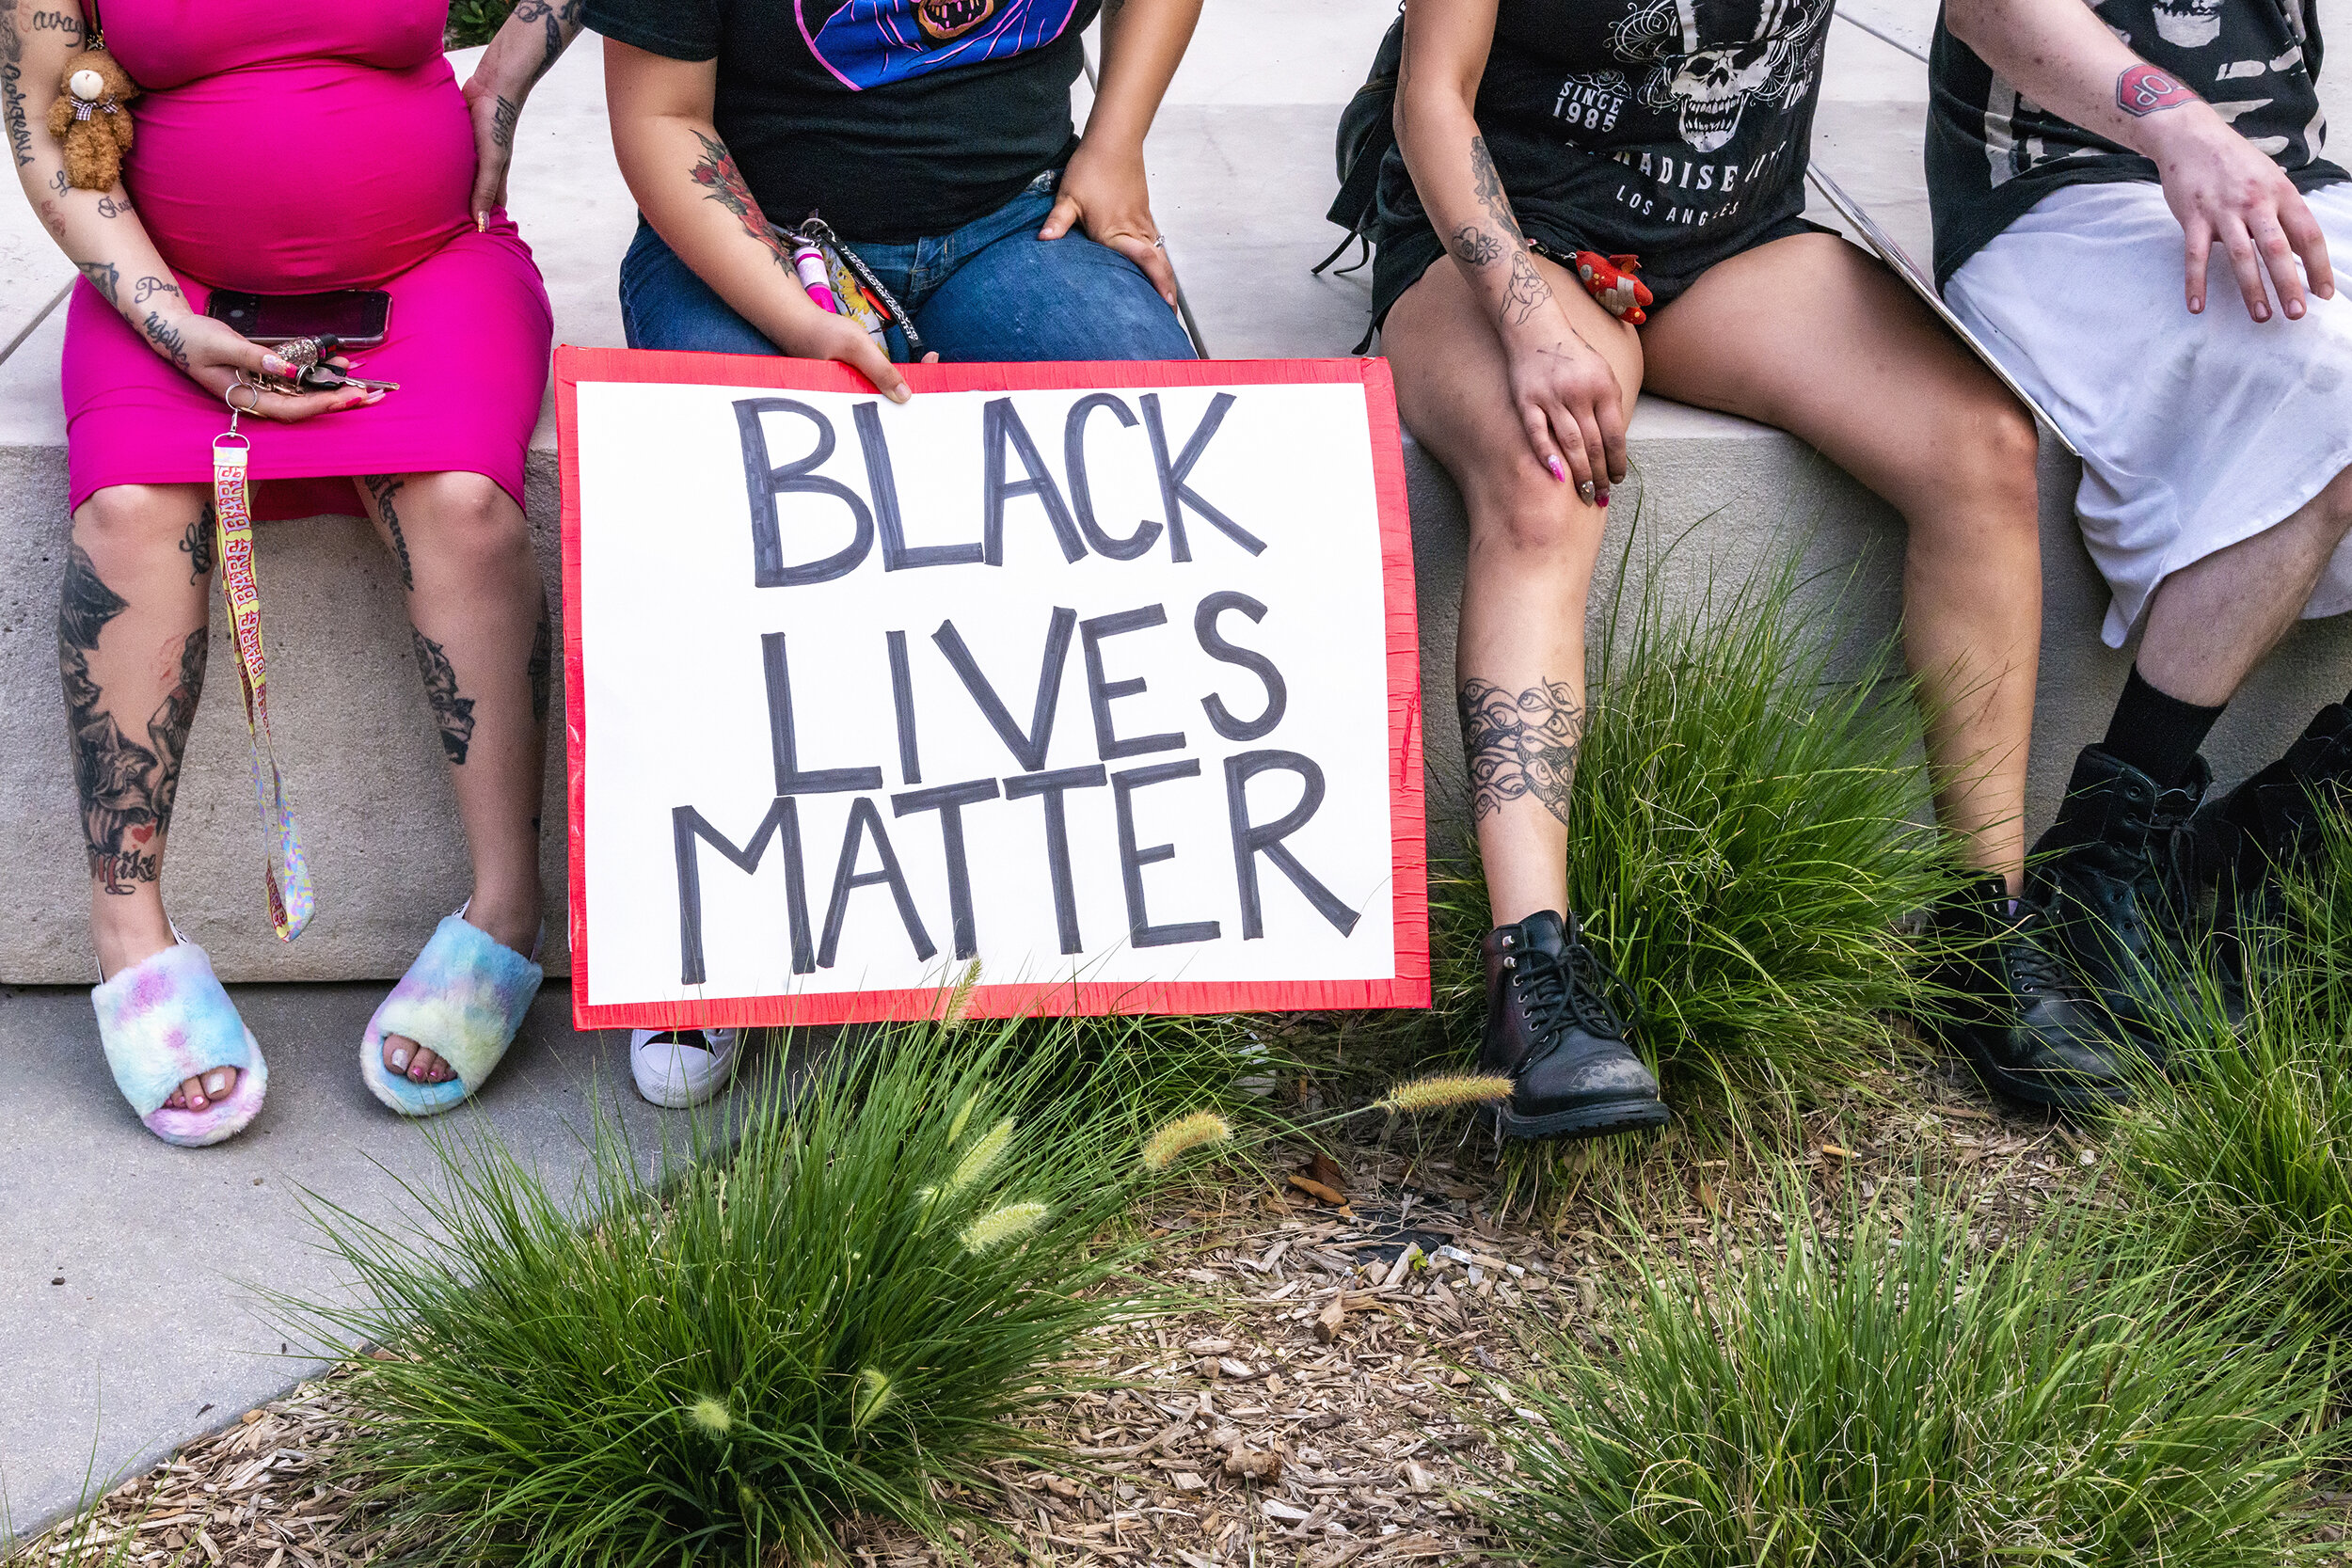  Protest marchers rest at Pacific Plaza in Dallas, TX on June 6, 2020.  Temperatures hit 97 degrees with some protesters collapsing from heat exhaustion. The woman at left said she was inclined to protest in the heat despite being eight months pregna